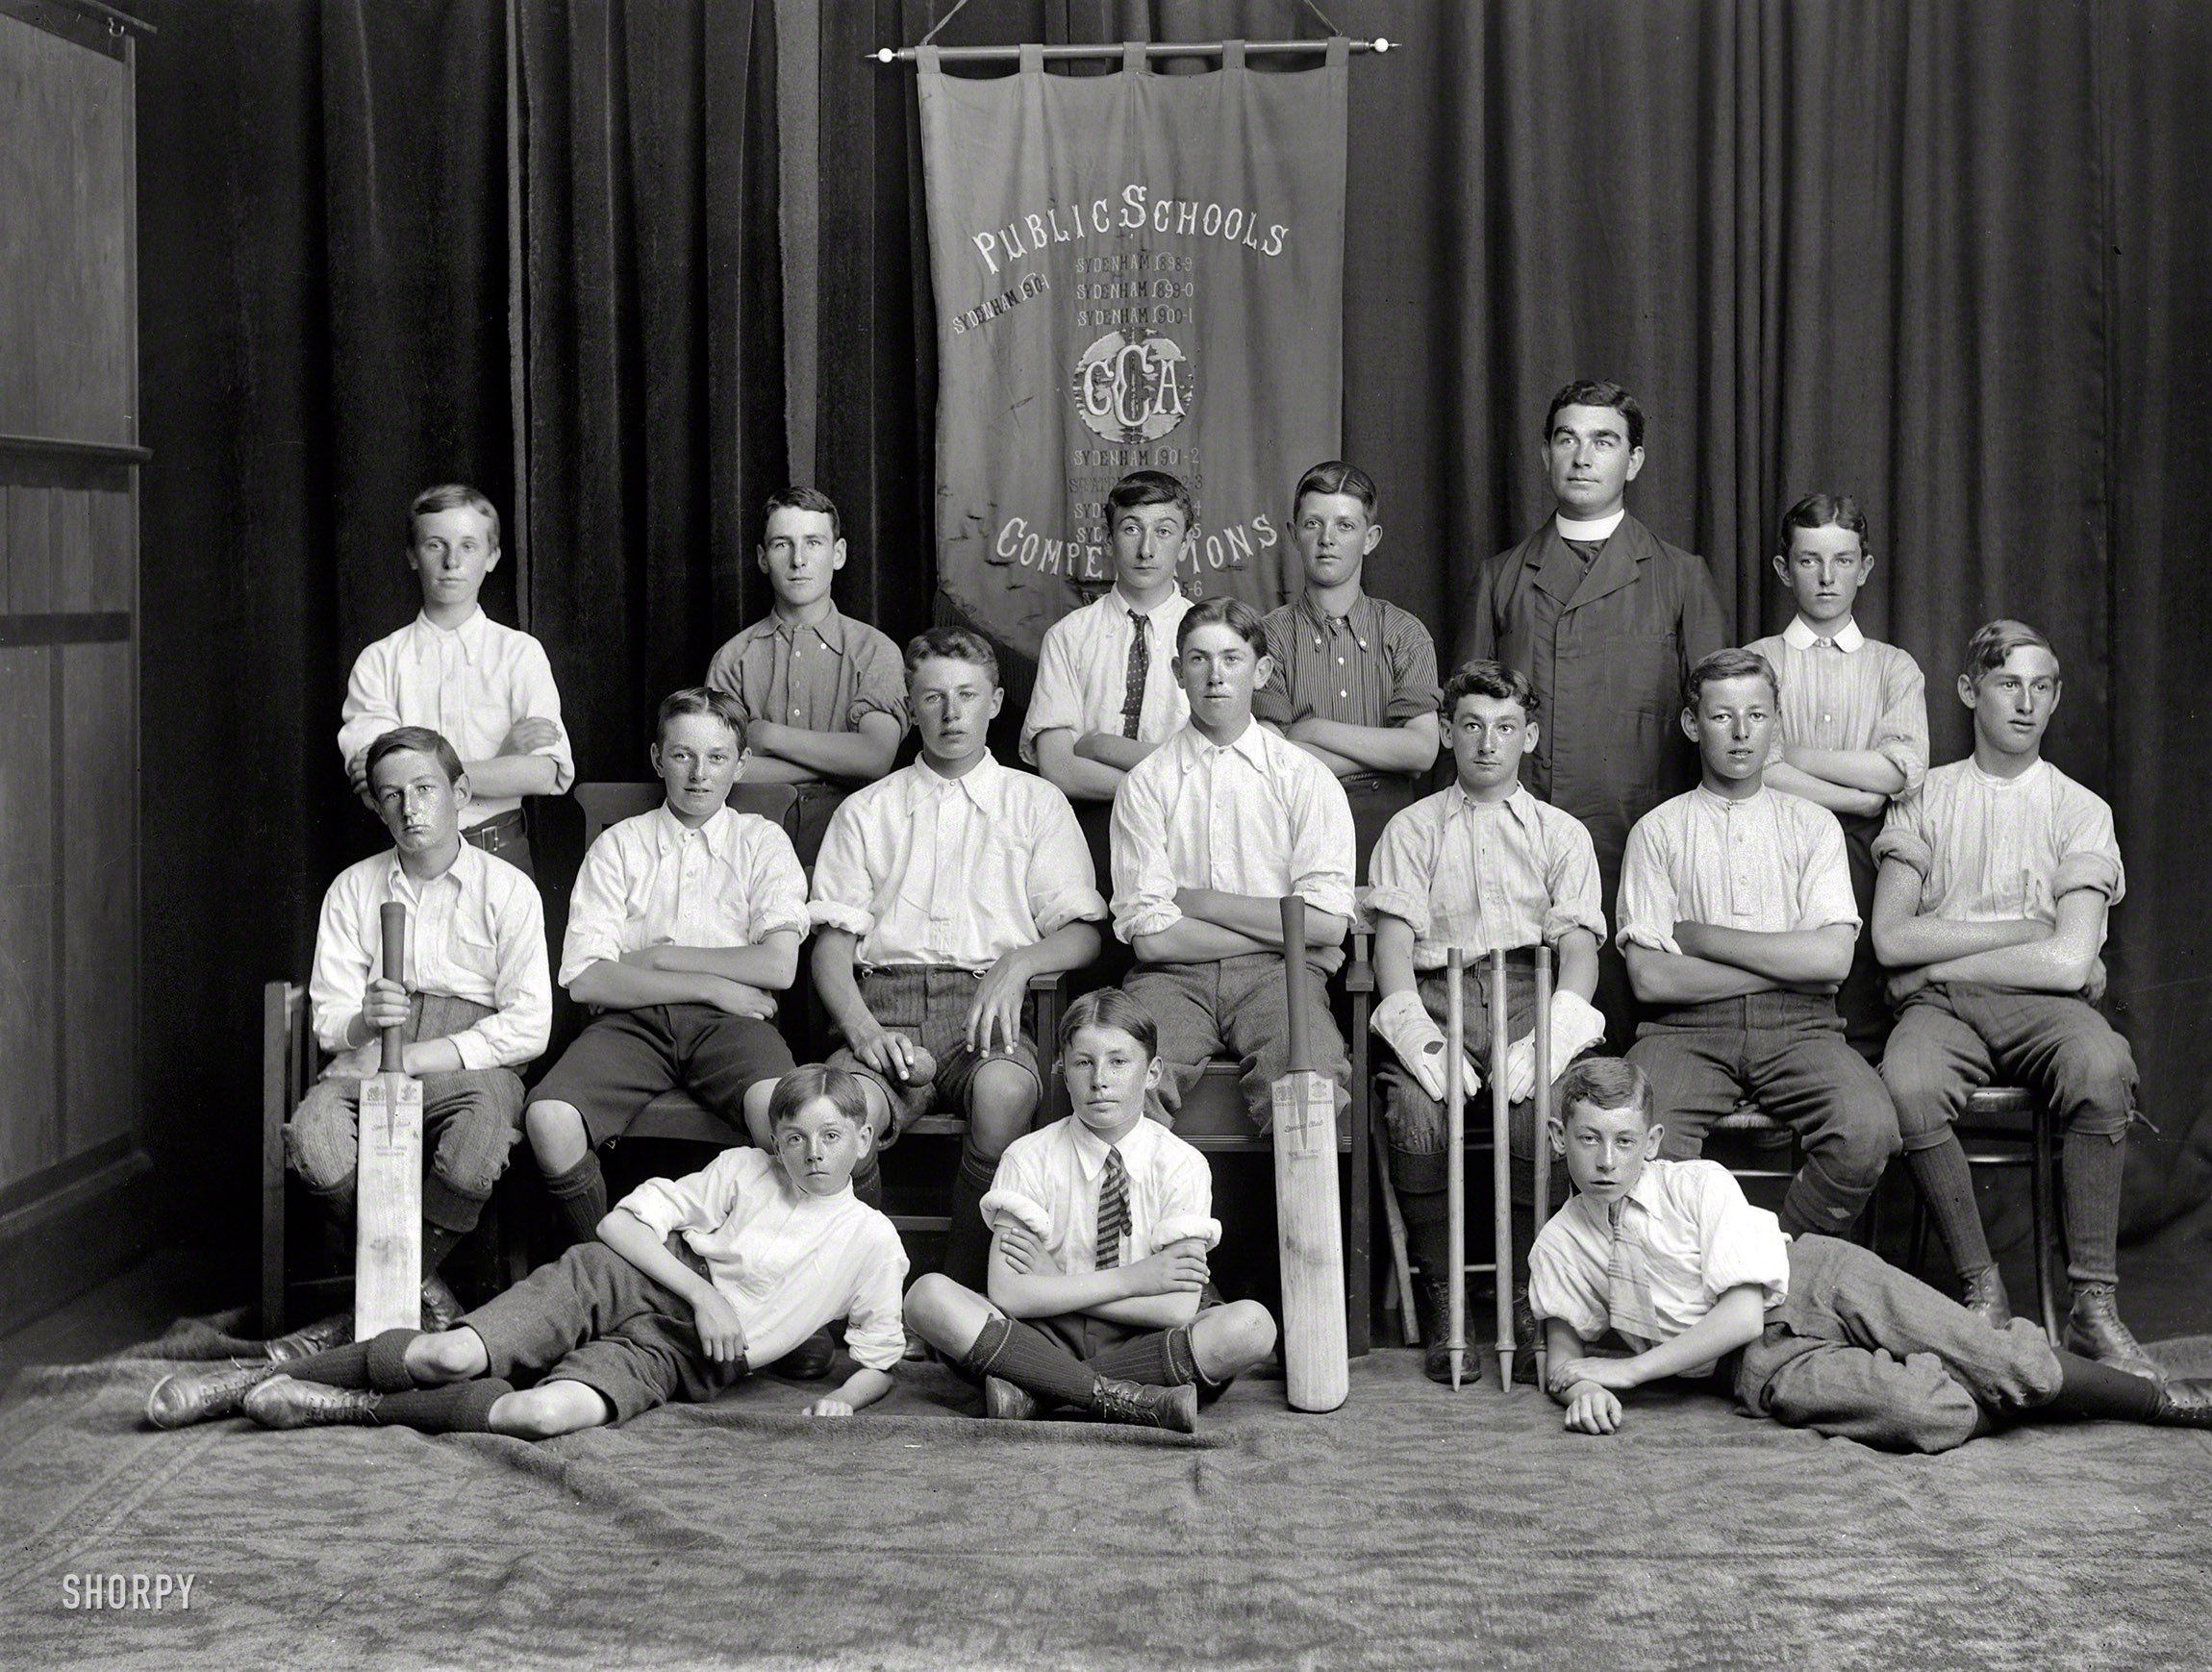 1913. "Marist Brothers cricket team, Christchurch, N.Z." A thrilling sport that has yet to make its way to these shores. Steffano Webb glass plate. View full size.